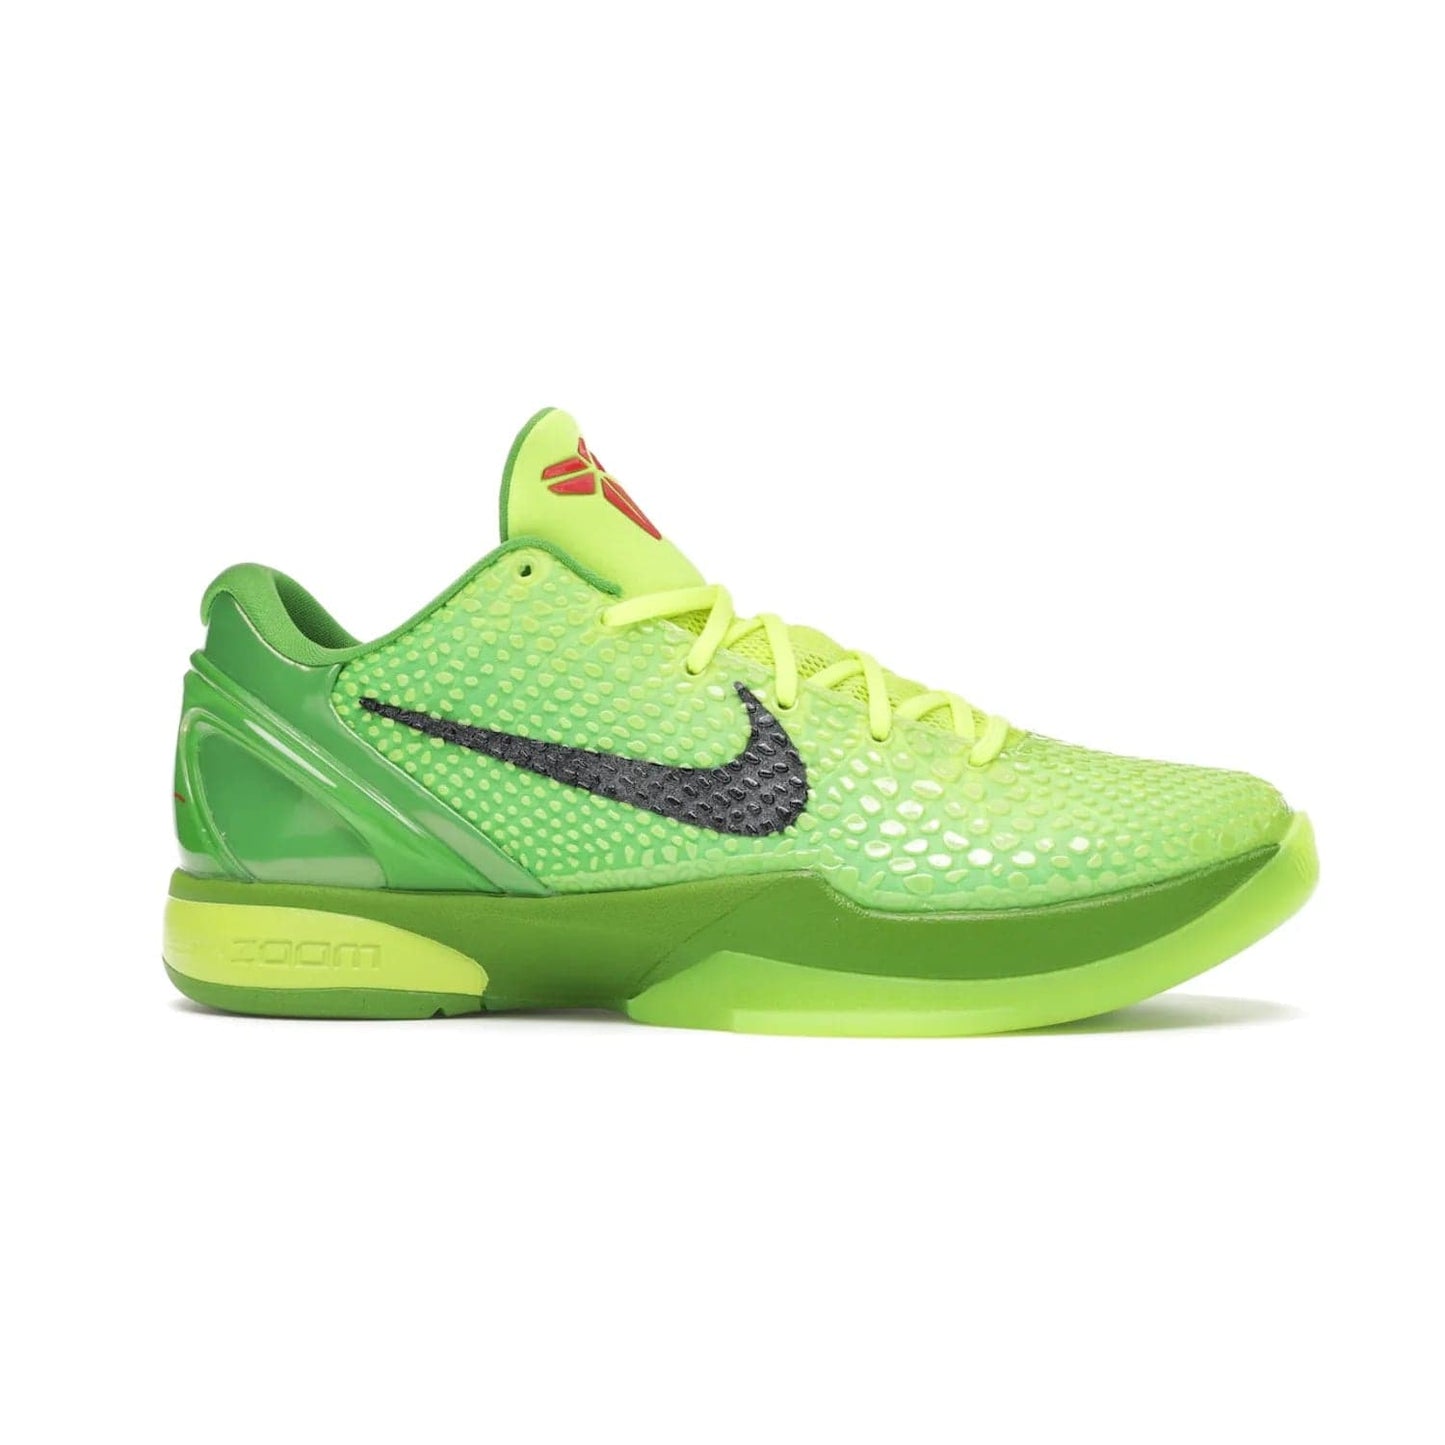 Nike Kobe 6 Protro Grinch (2020) - Image 2 - Only at www.BallersClubKickz.com - #
The Nike Kobe 6 Protro Grinch updates the iconic 2011 design with modern tech like a Zoom Air cushioning system, scaled-down traction, and updated silhouette. Experience the textured Green Apple and Volt upper plus bright red and green accents for $180.